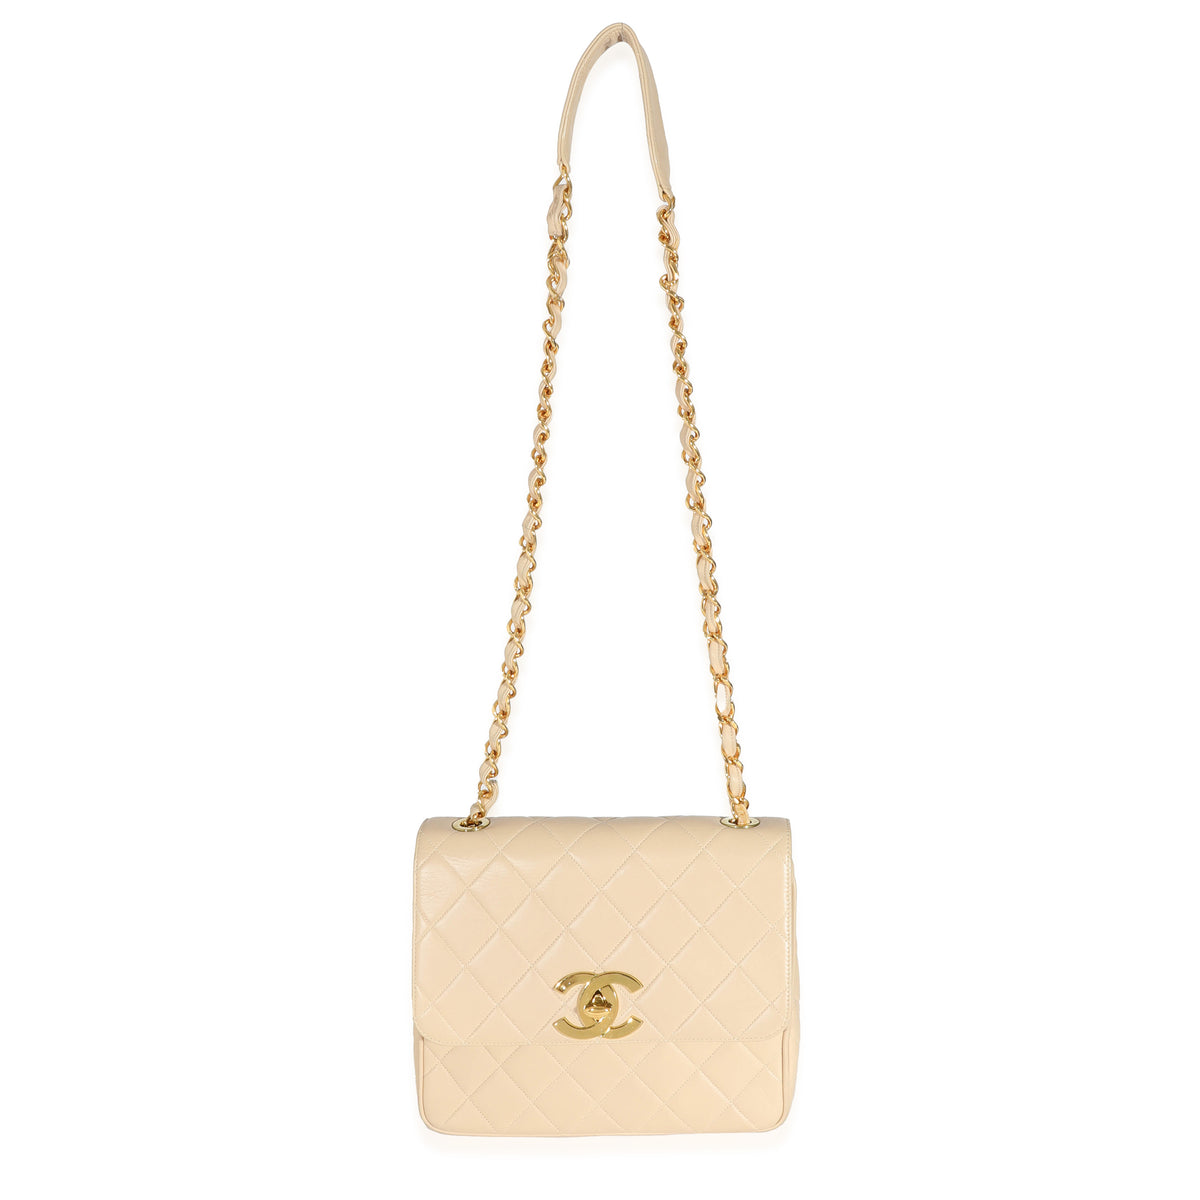 CHANEL Bags  Handbags for Women for sale  Shop with Afterpay  eBay AU